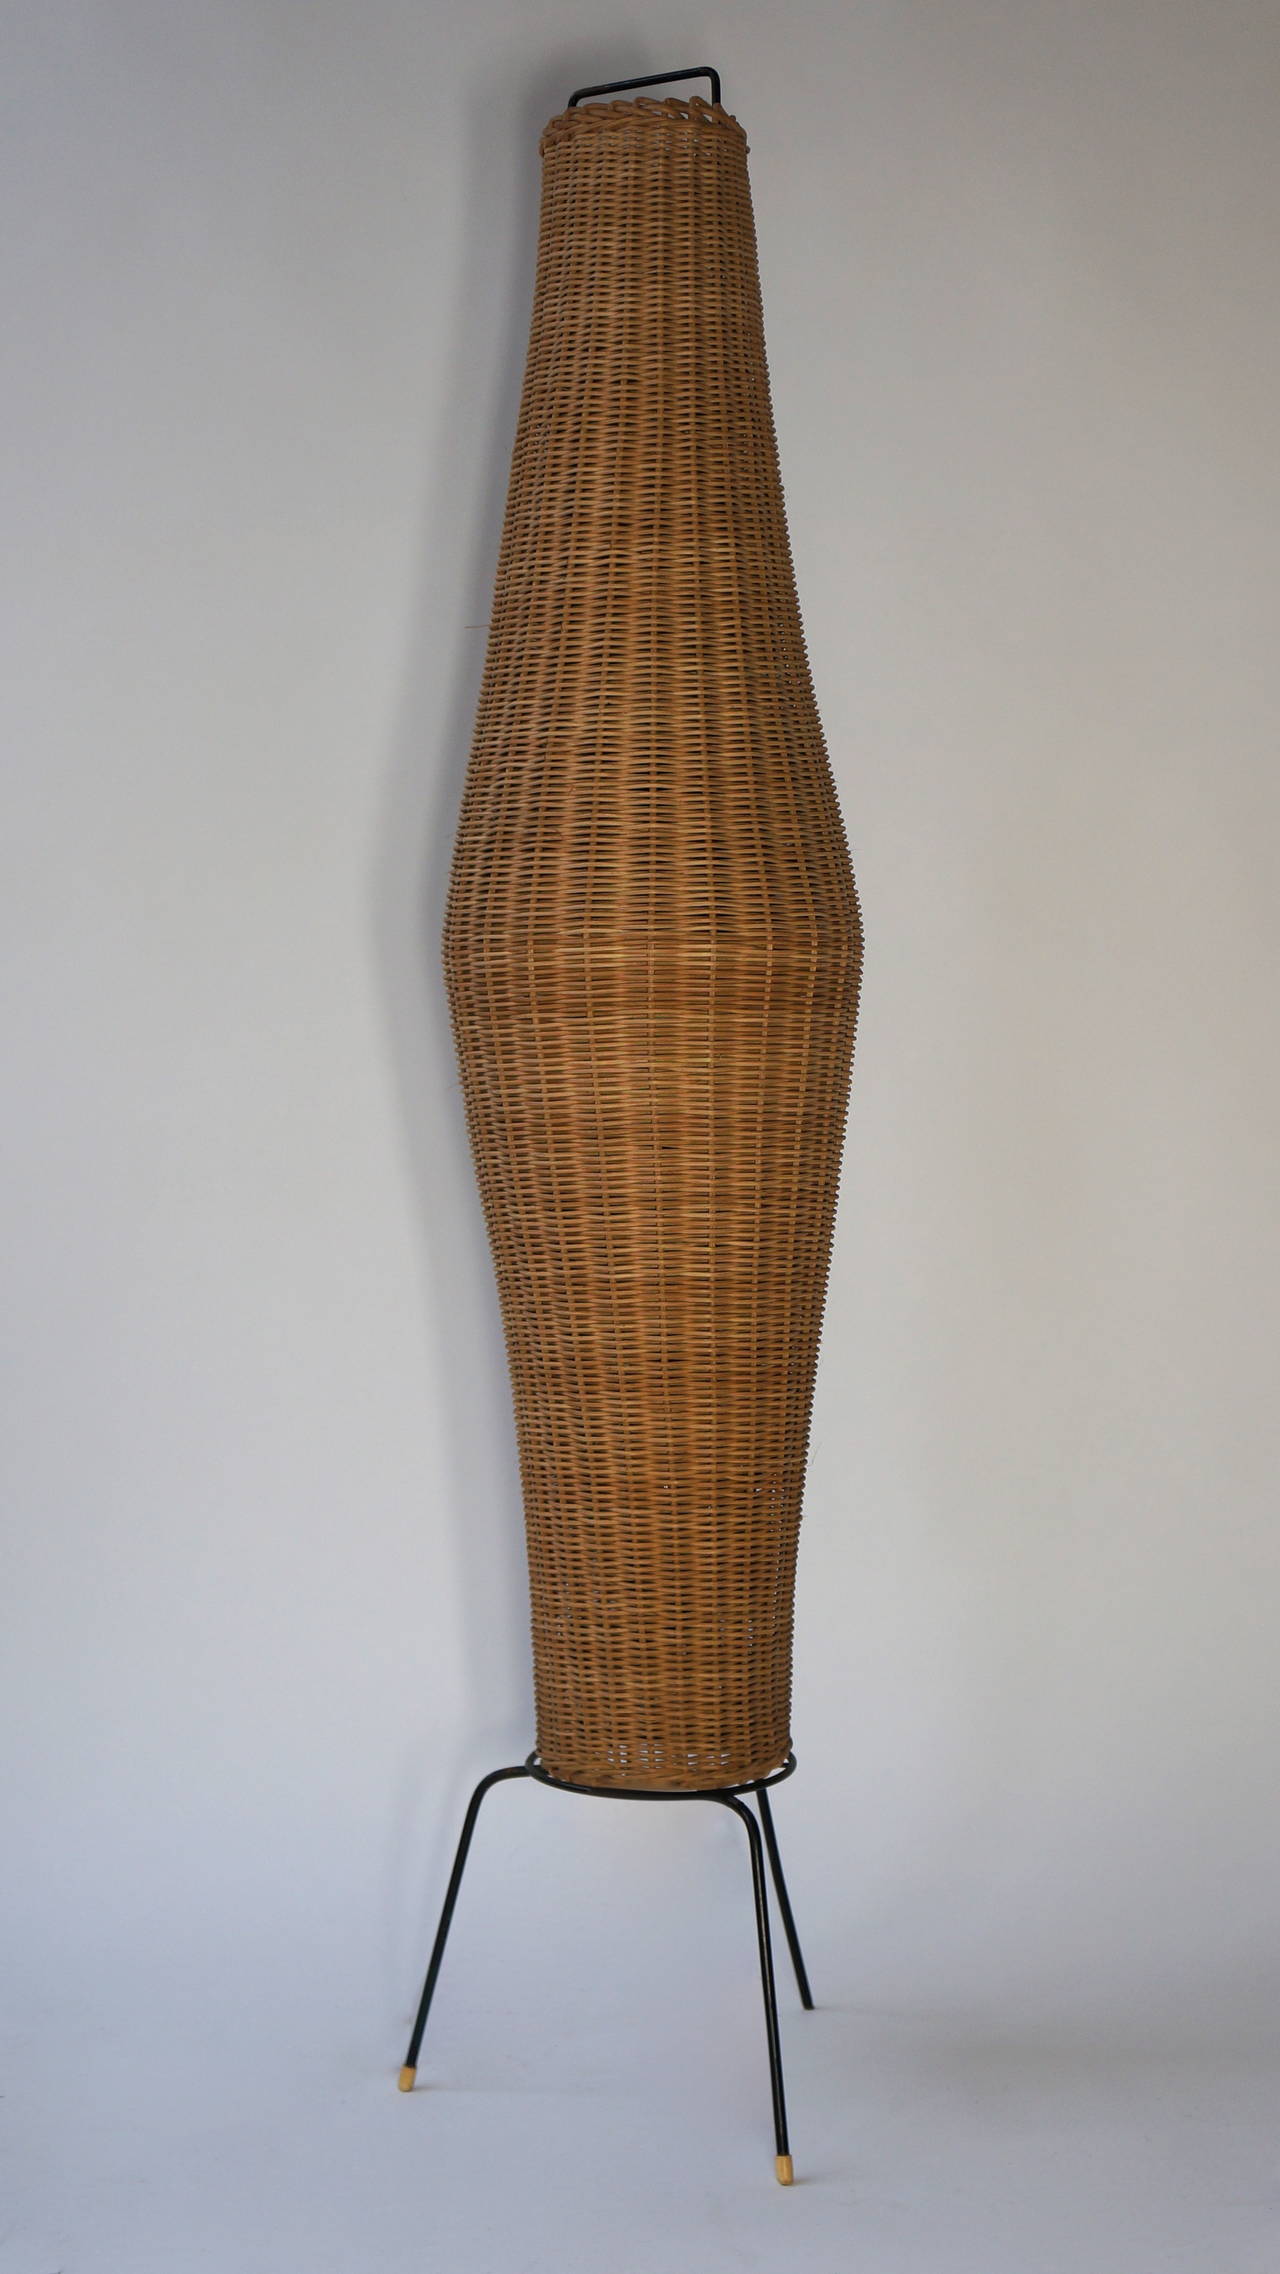 A large-scale floor lamp with a woven wicker body in an asymmetrical 'fishing basket' form with a handle at the top all supported by a wrought iron tripod base.